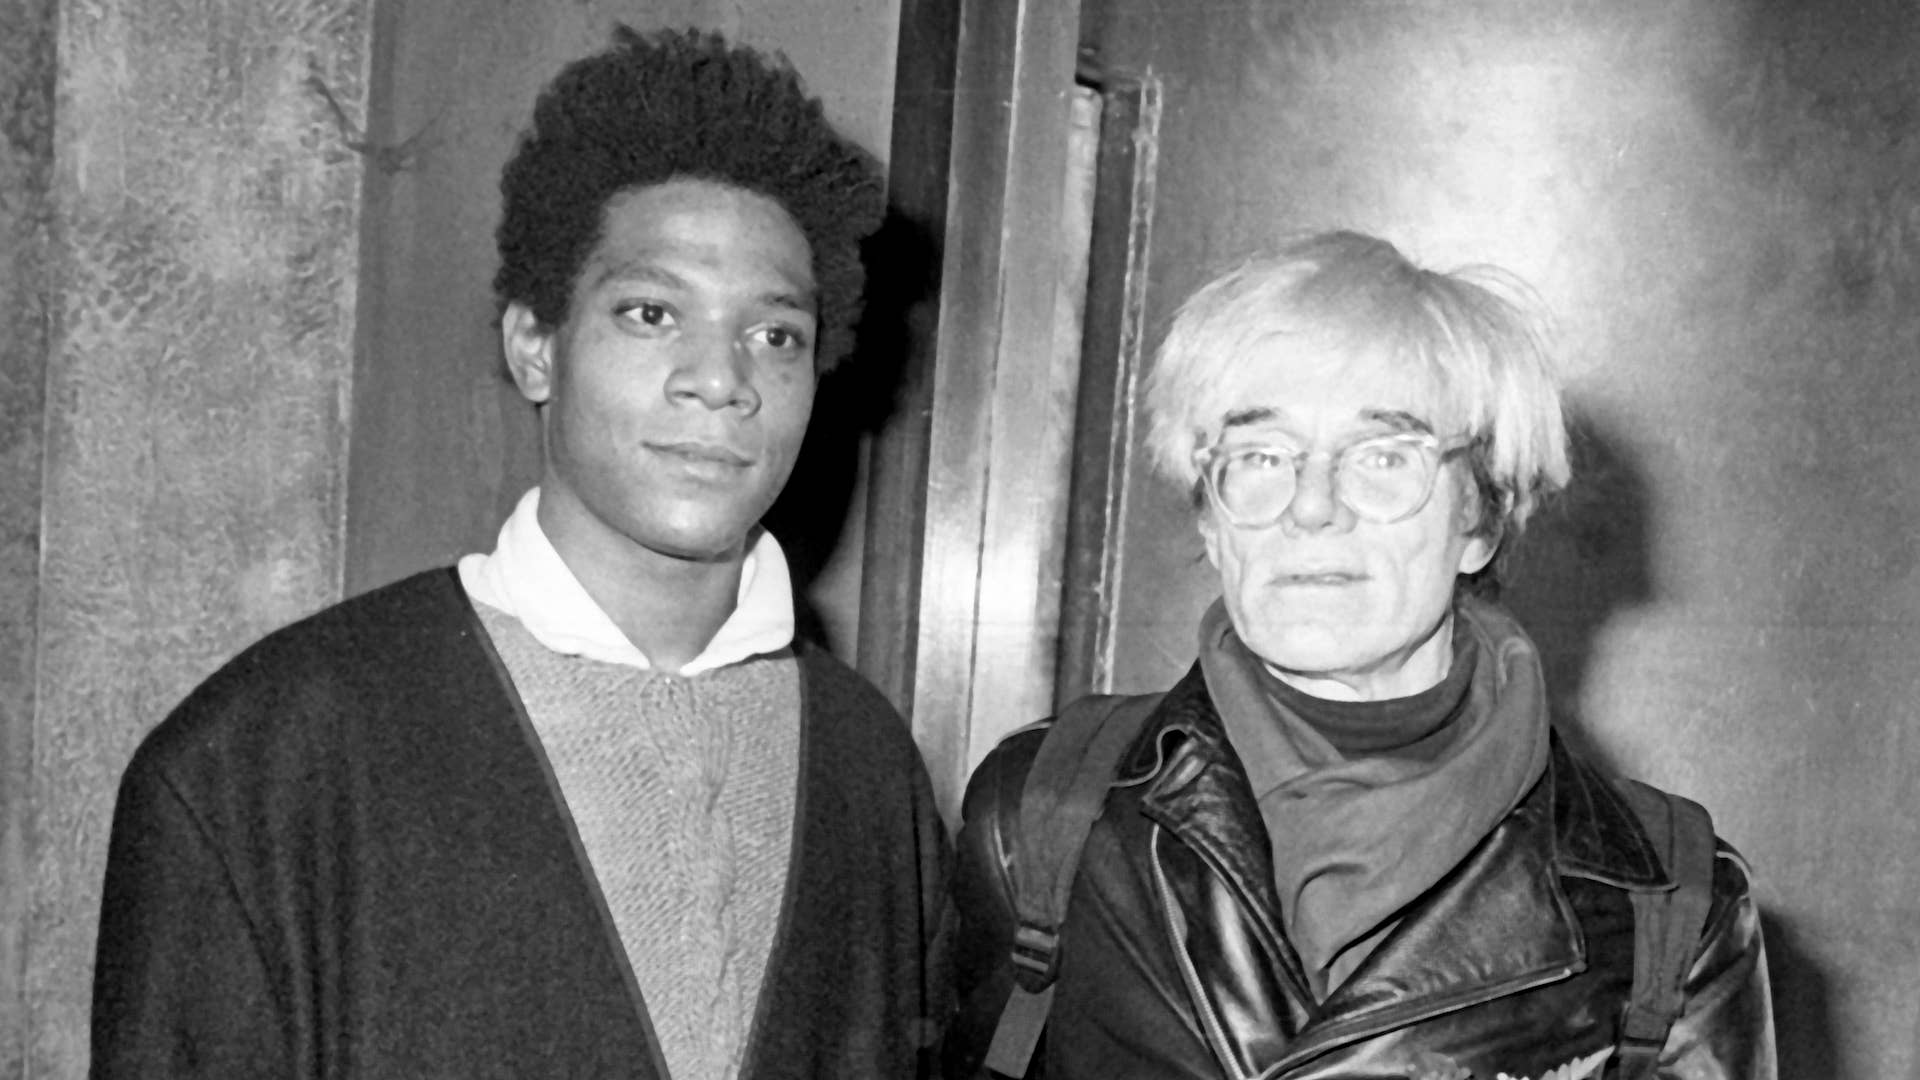 Jean Michel Basquiat and Andy Warhol attend Gifts For The City Of New York Benefit.